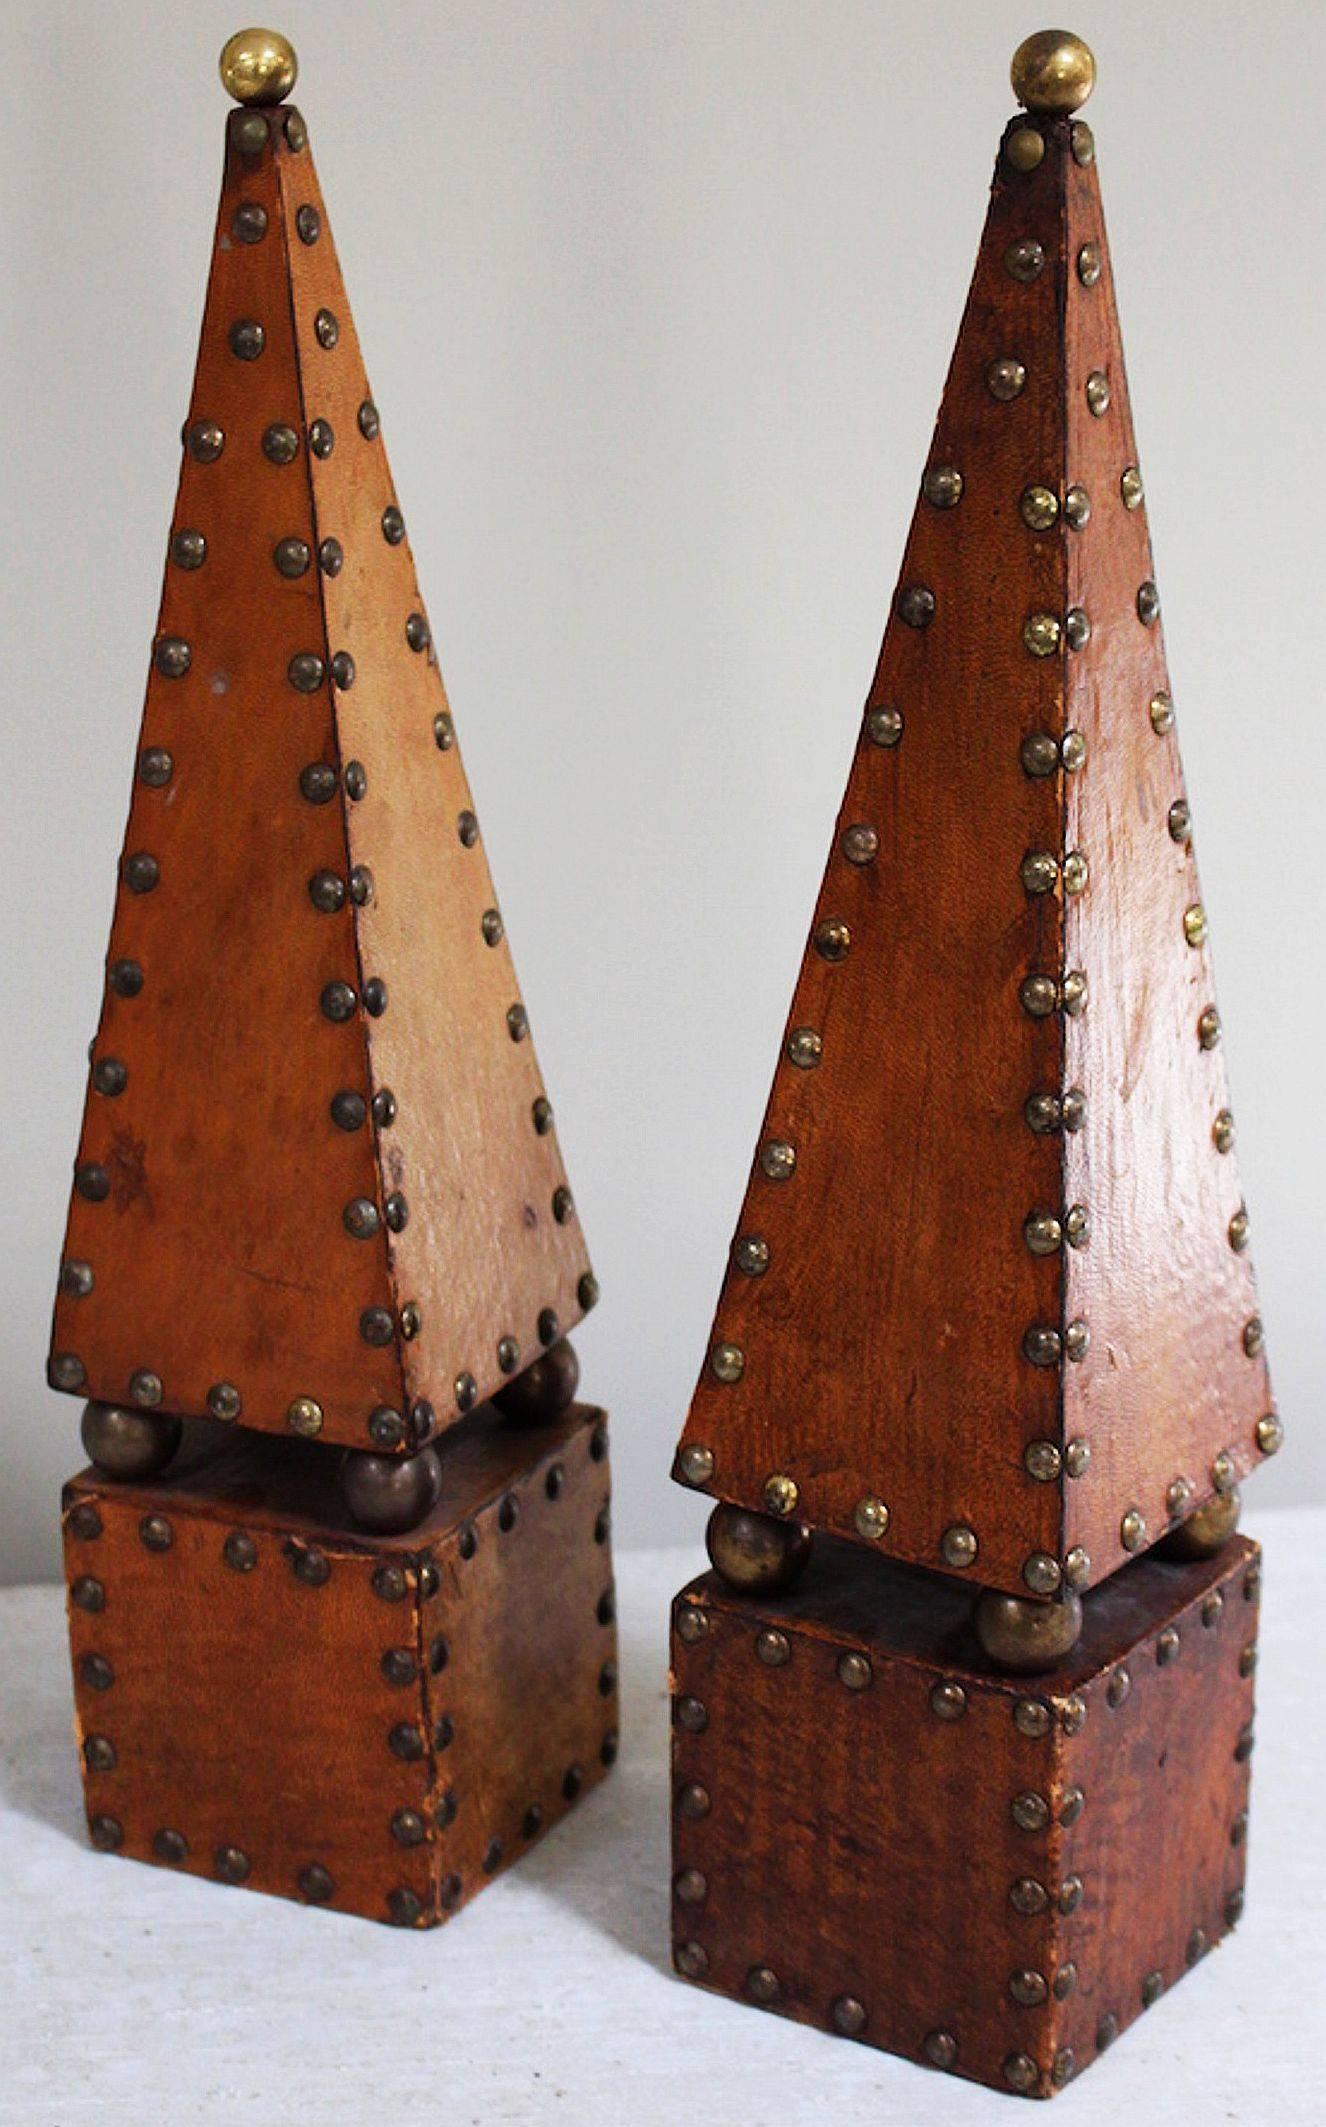 20th Century English Decorative Leather and Brass Obelisks (Priced as a Pair)